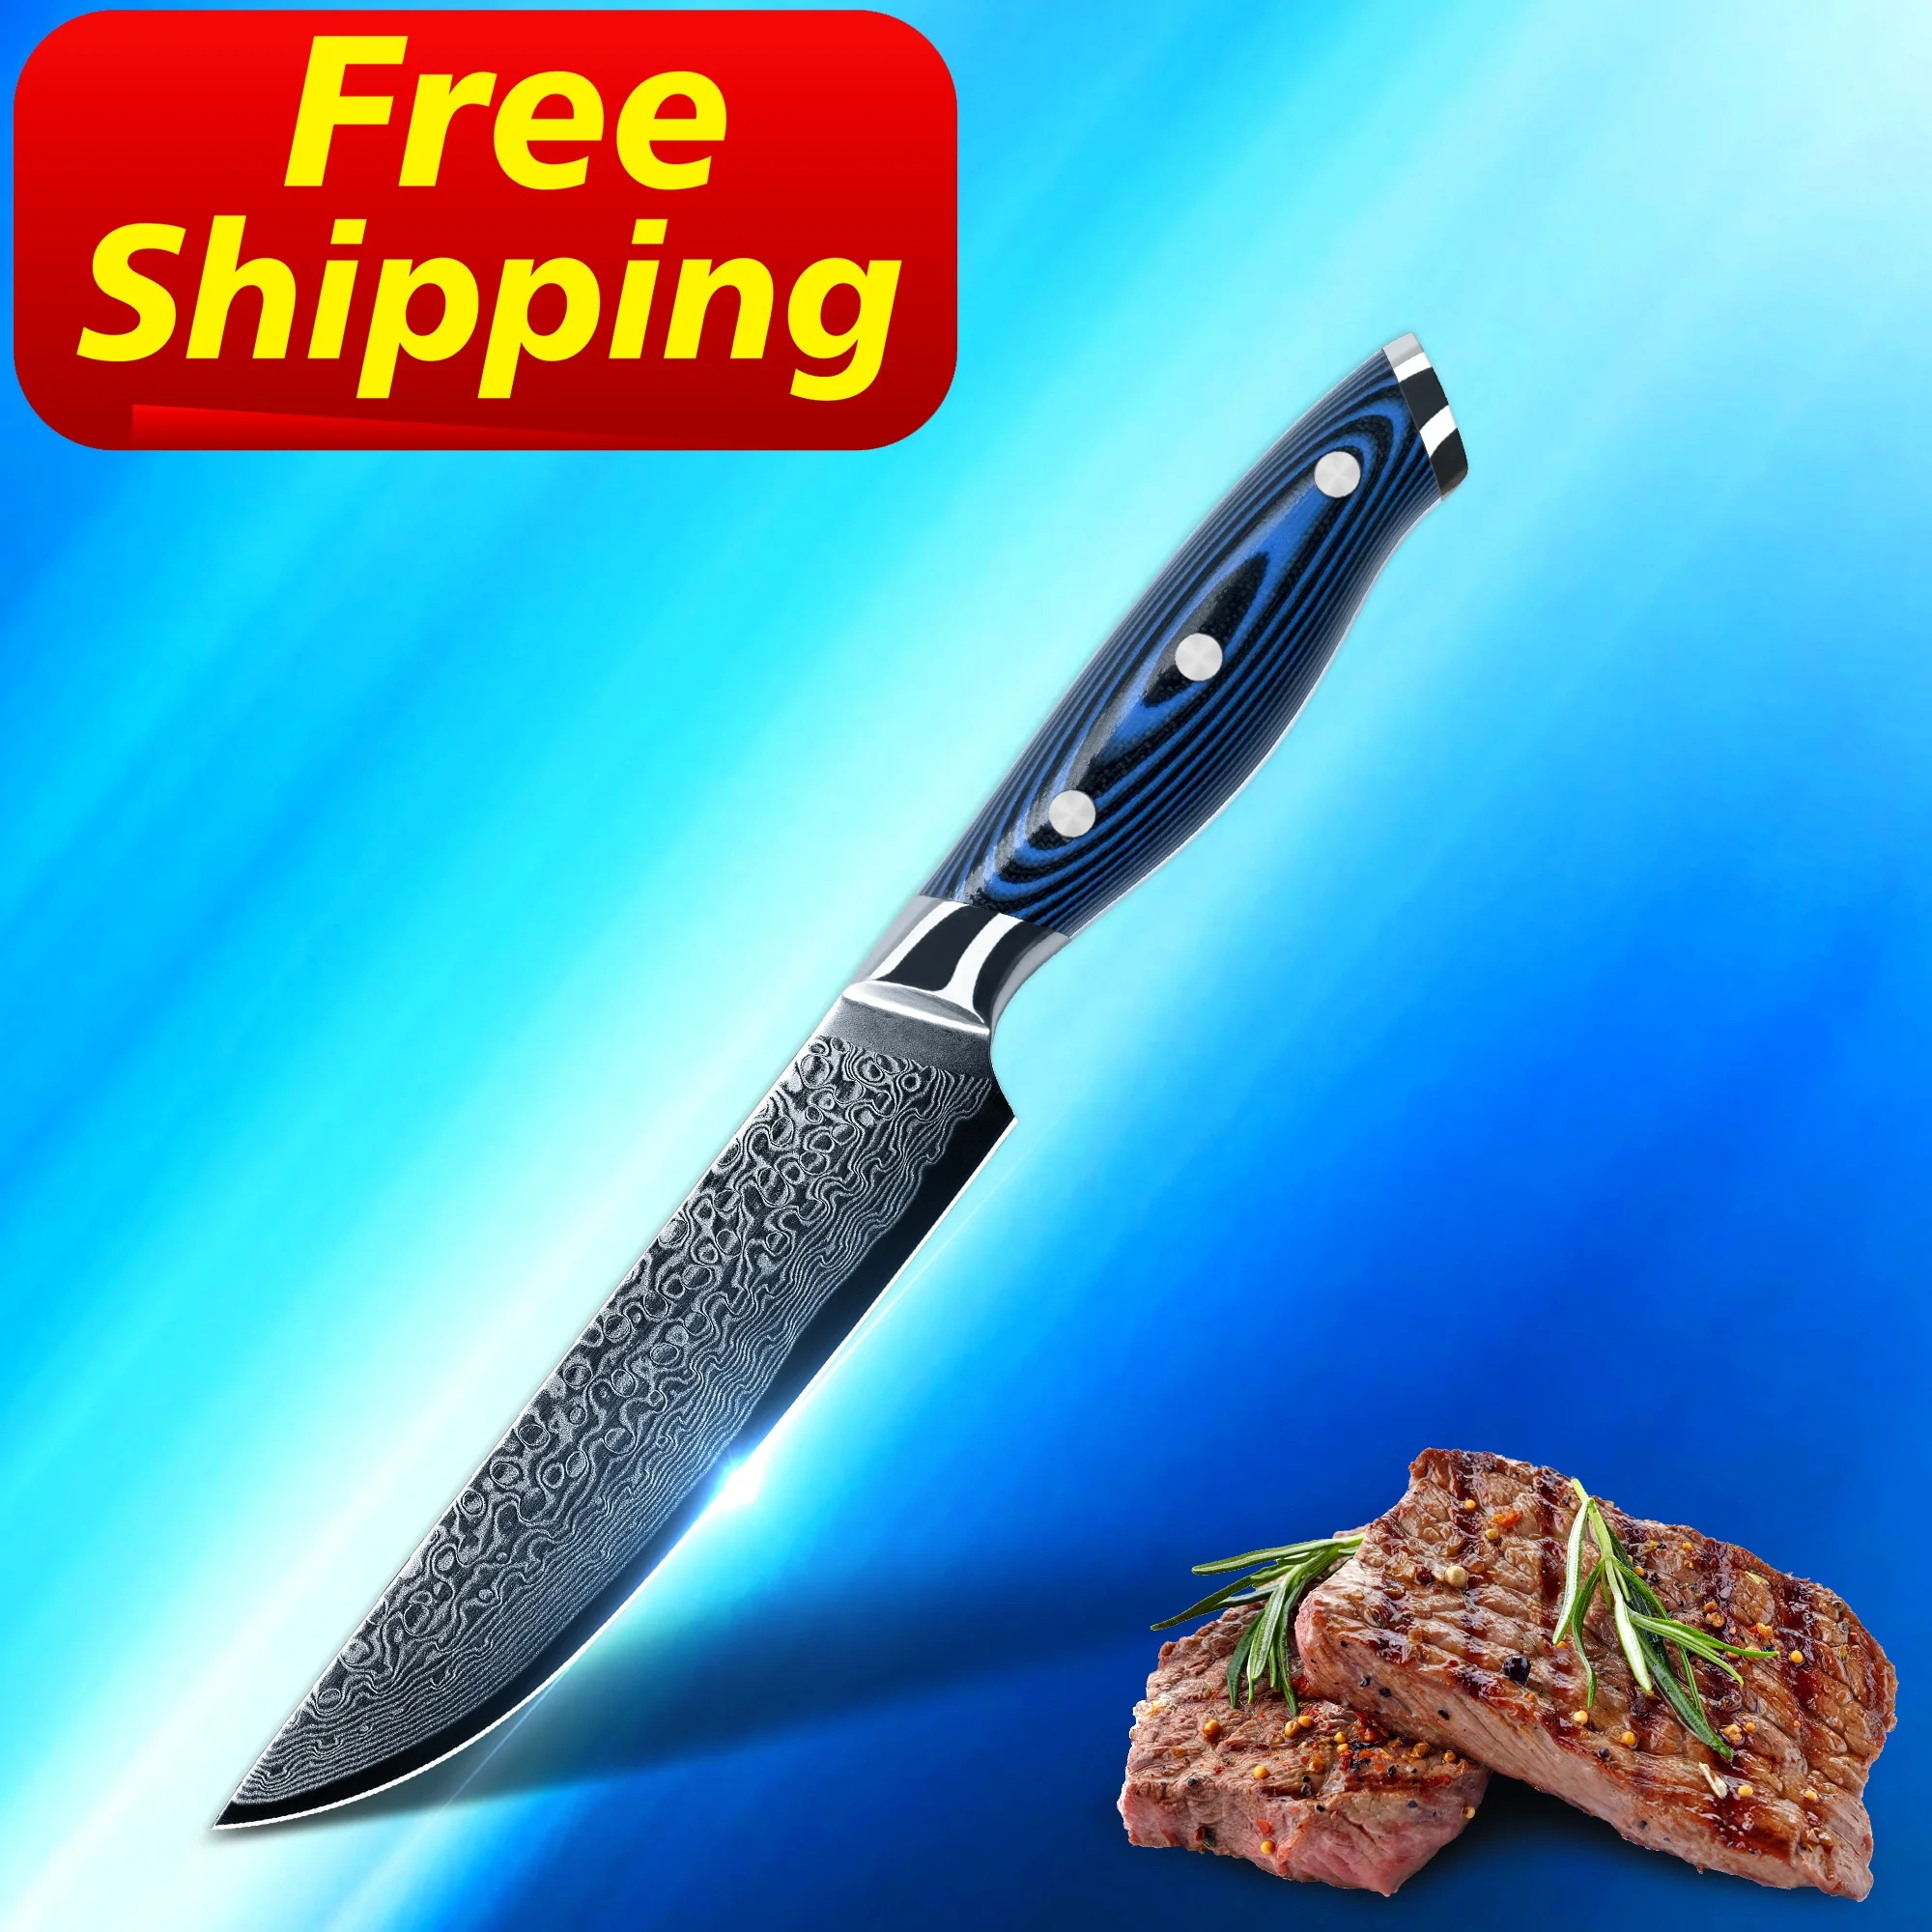 

Free Shipping orders over 100 pcs Amazon top seller Blue G10 handle 5'' damascus steak knife utility knives in USA, Customized color